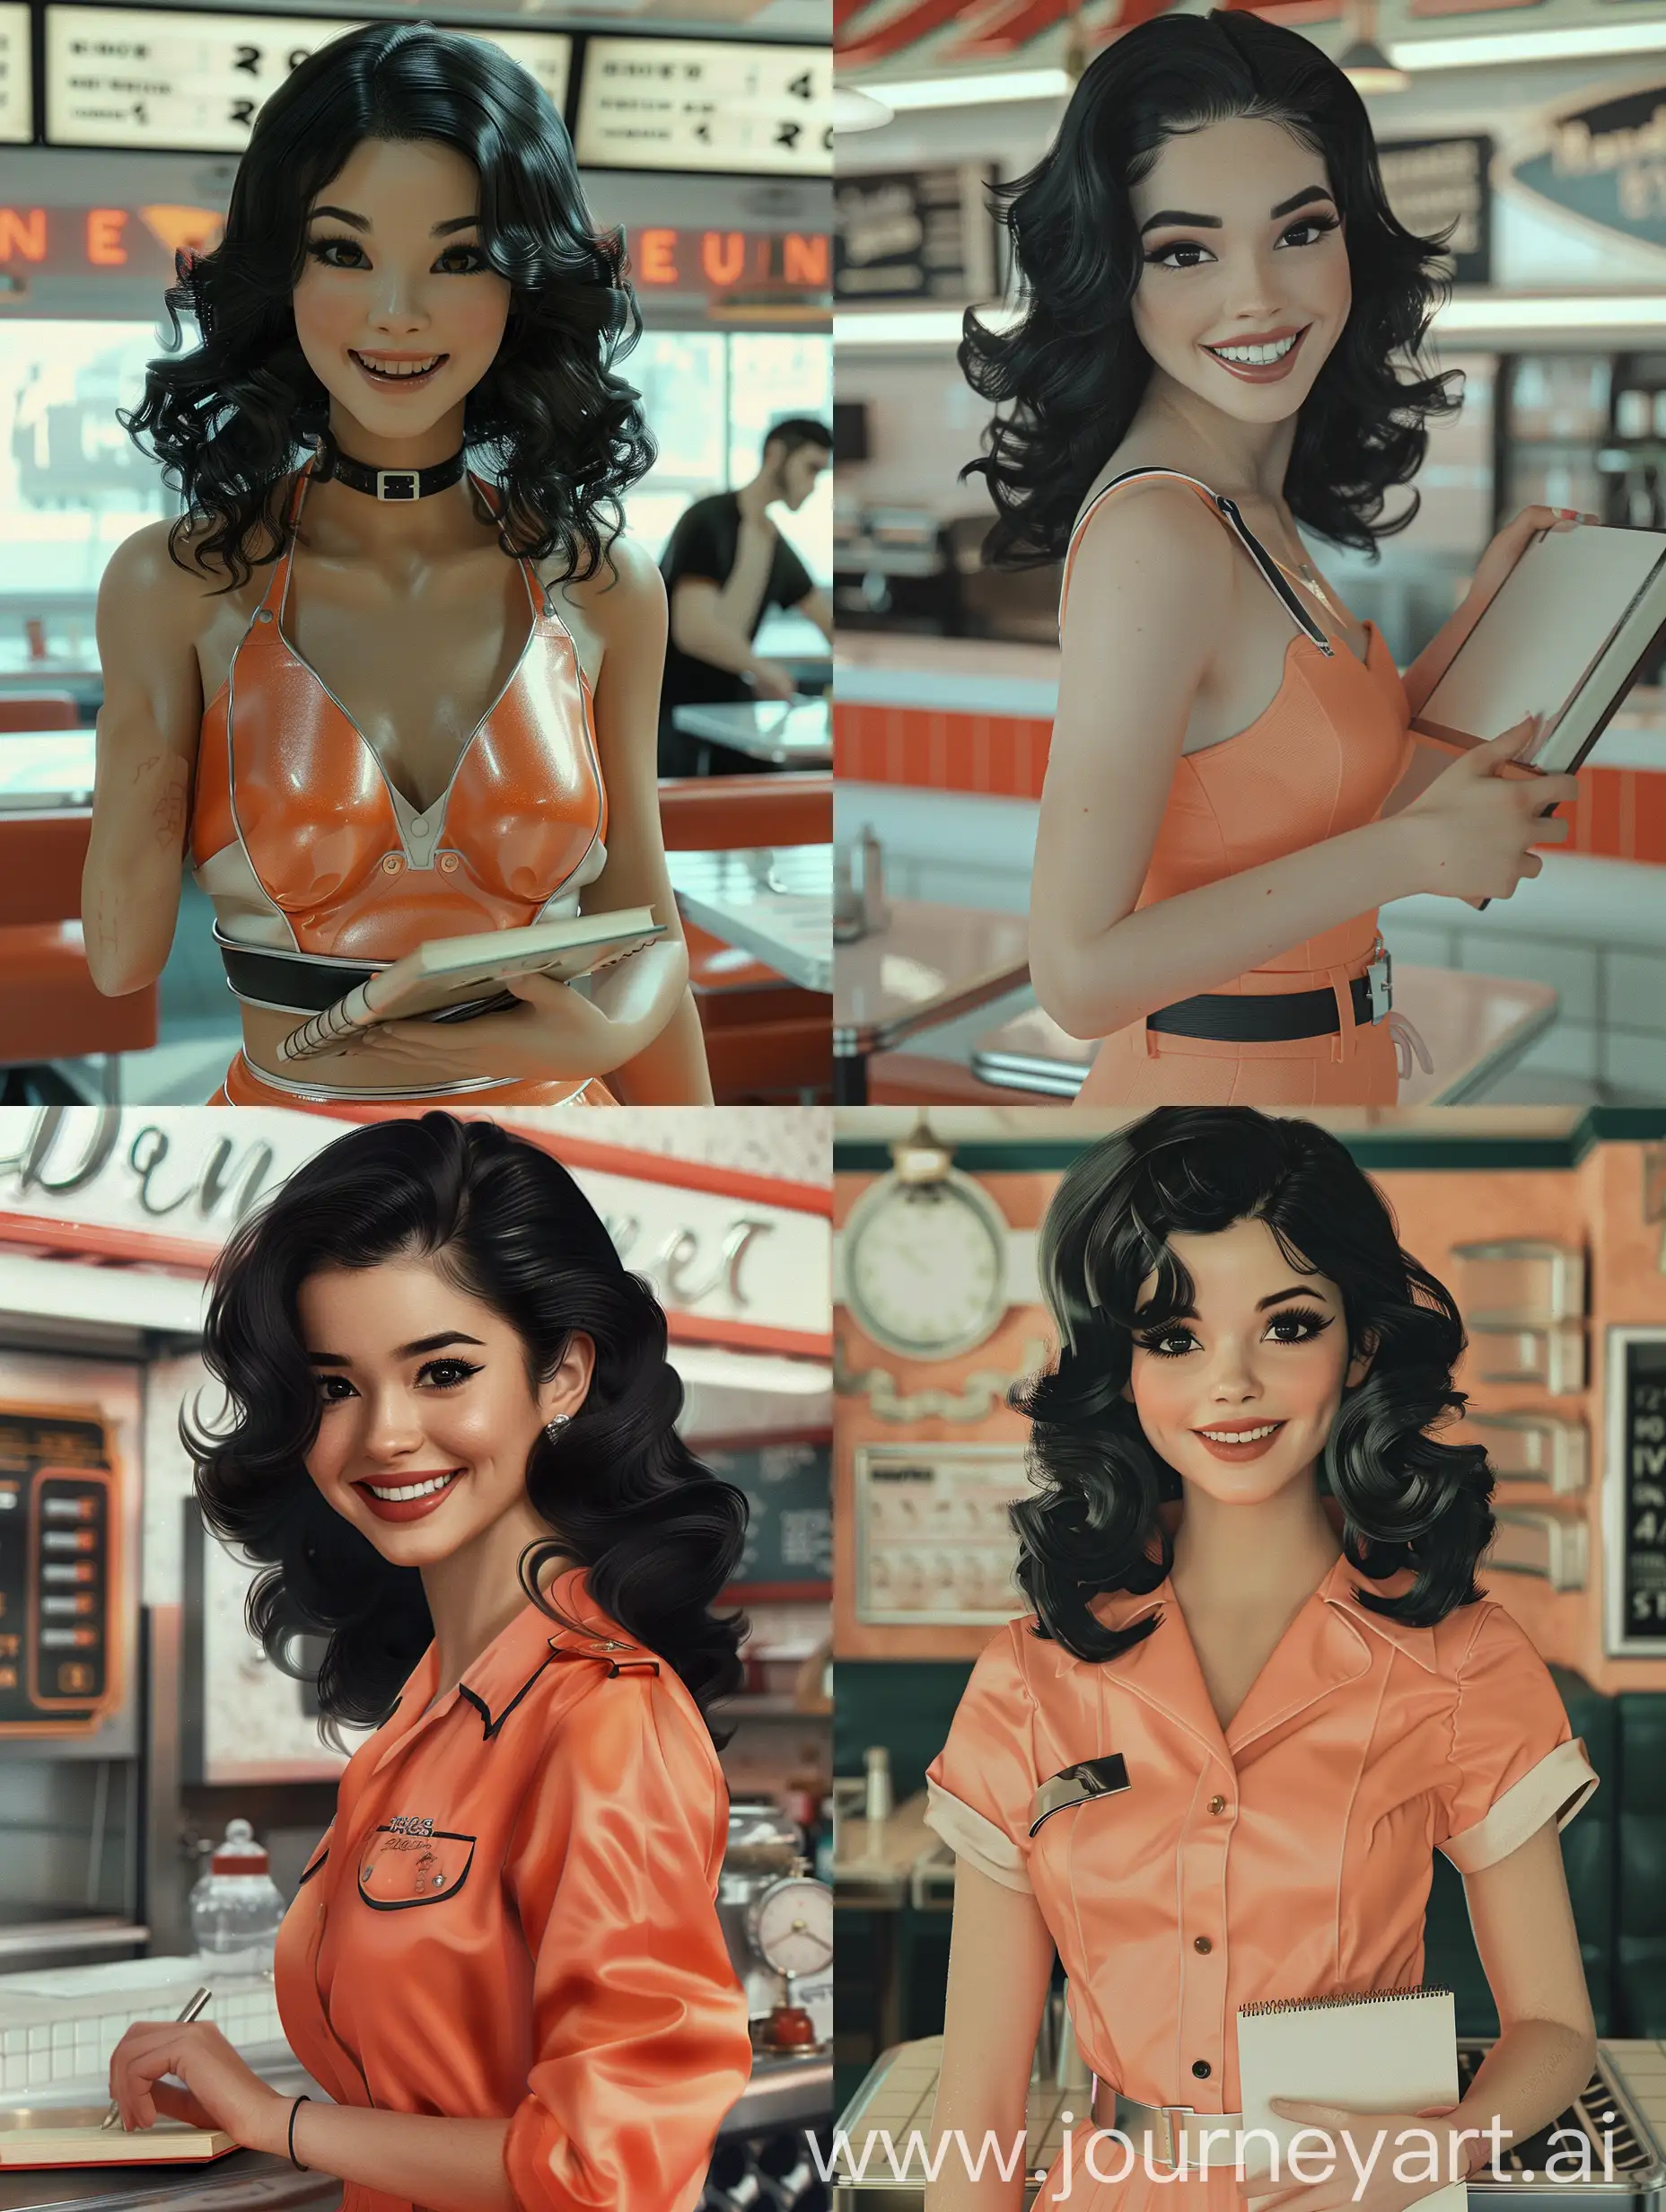 An 80s sexy waitress serving you, real, realistic,
photorealistic, smile, from the front, black wavy hair, black eyes, white skin, salmon-colored waitress outfit, 80s style, 80s look, 80s effect, 80s clothes and hair, diner background, retro, indie, vintage, classic, old, nostalgic, grounge, holding a notebook, VHS photo effect, sexy, glamour, luxury, fame, love